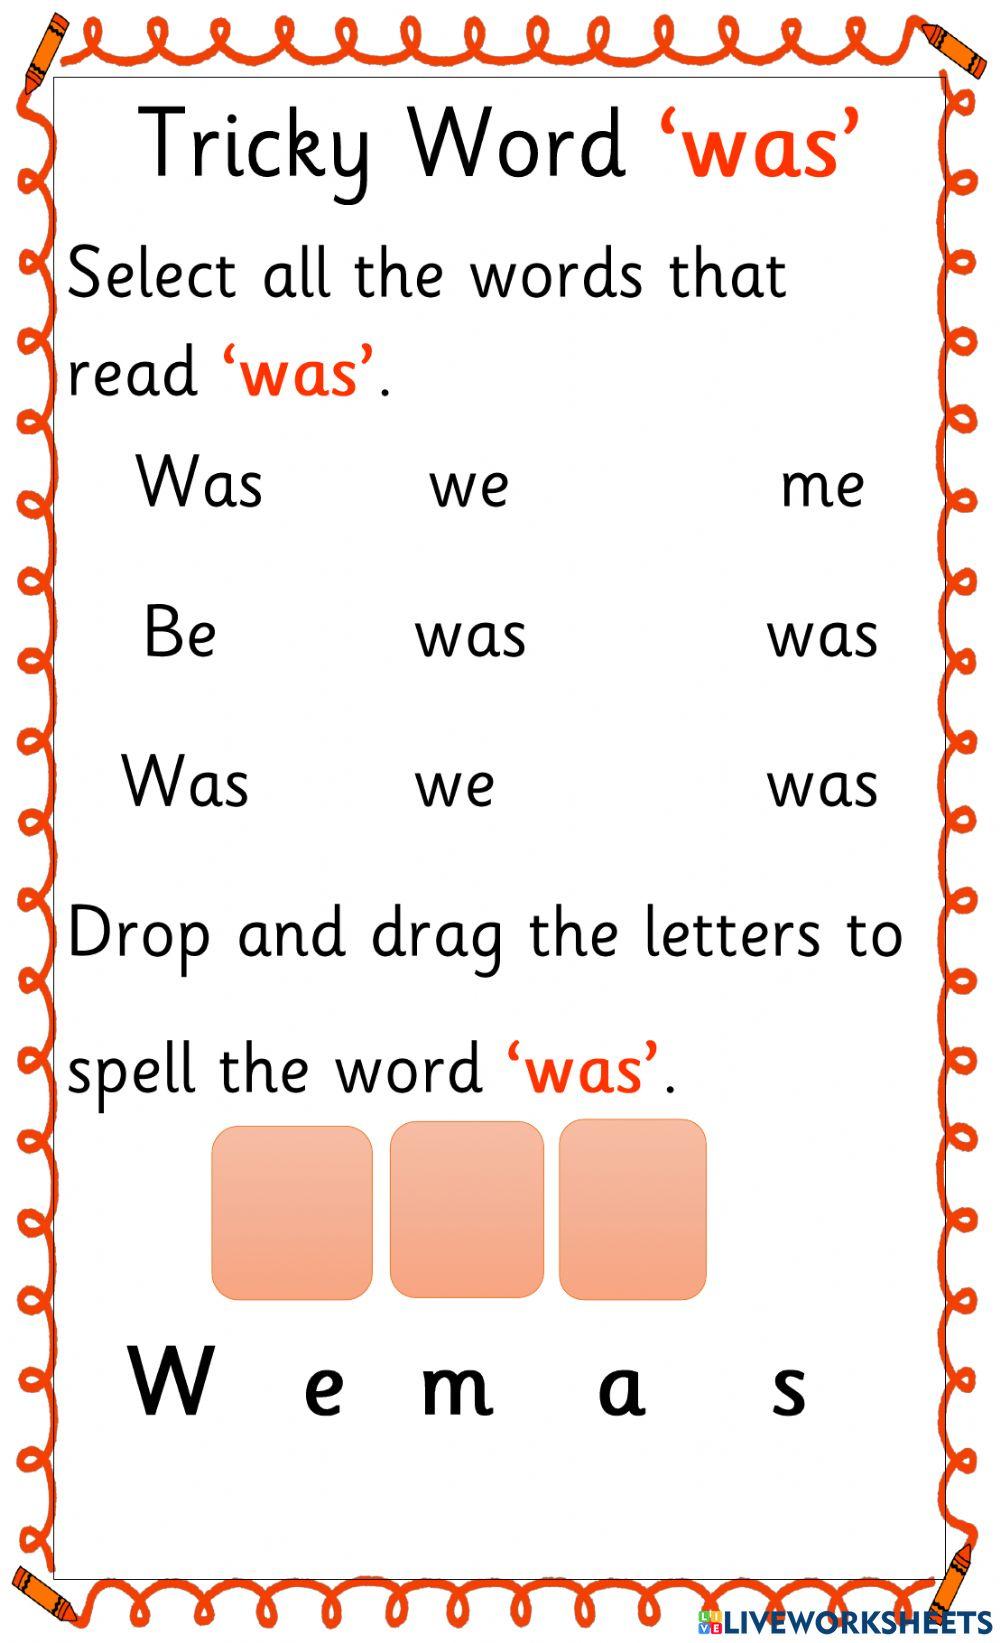 Tricky Word 'was'